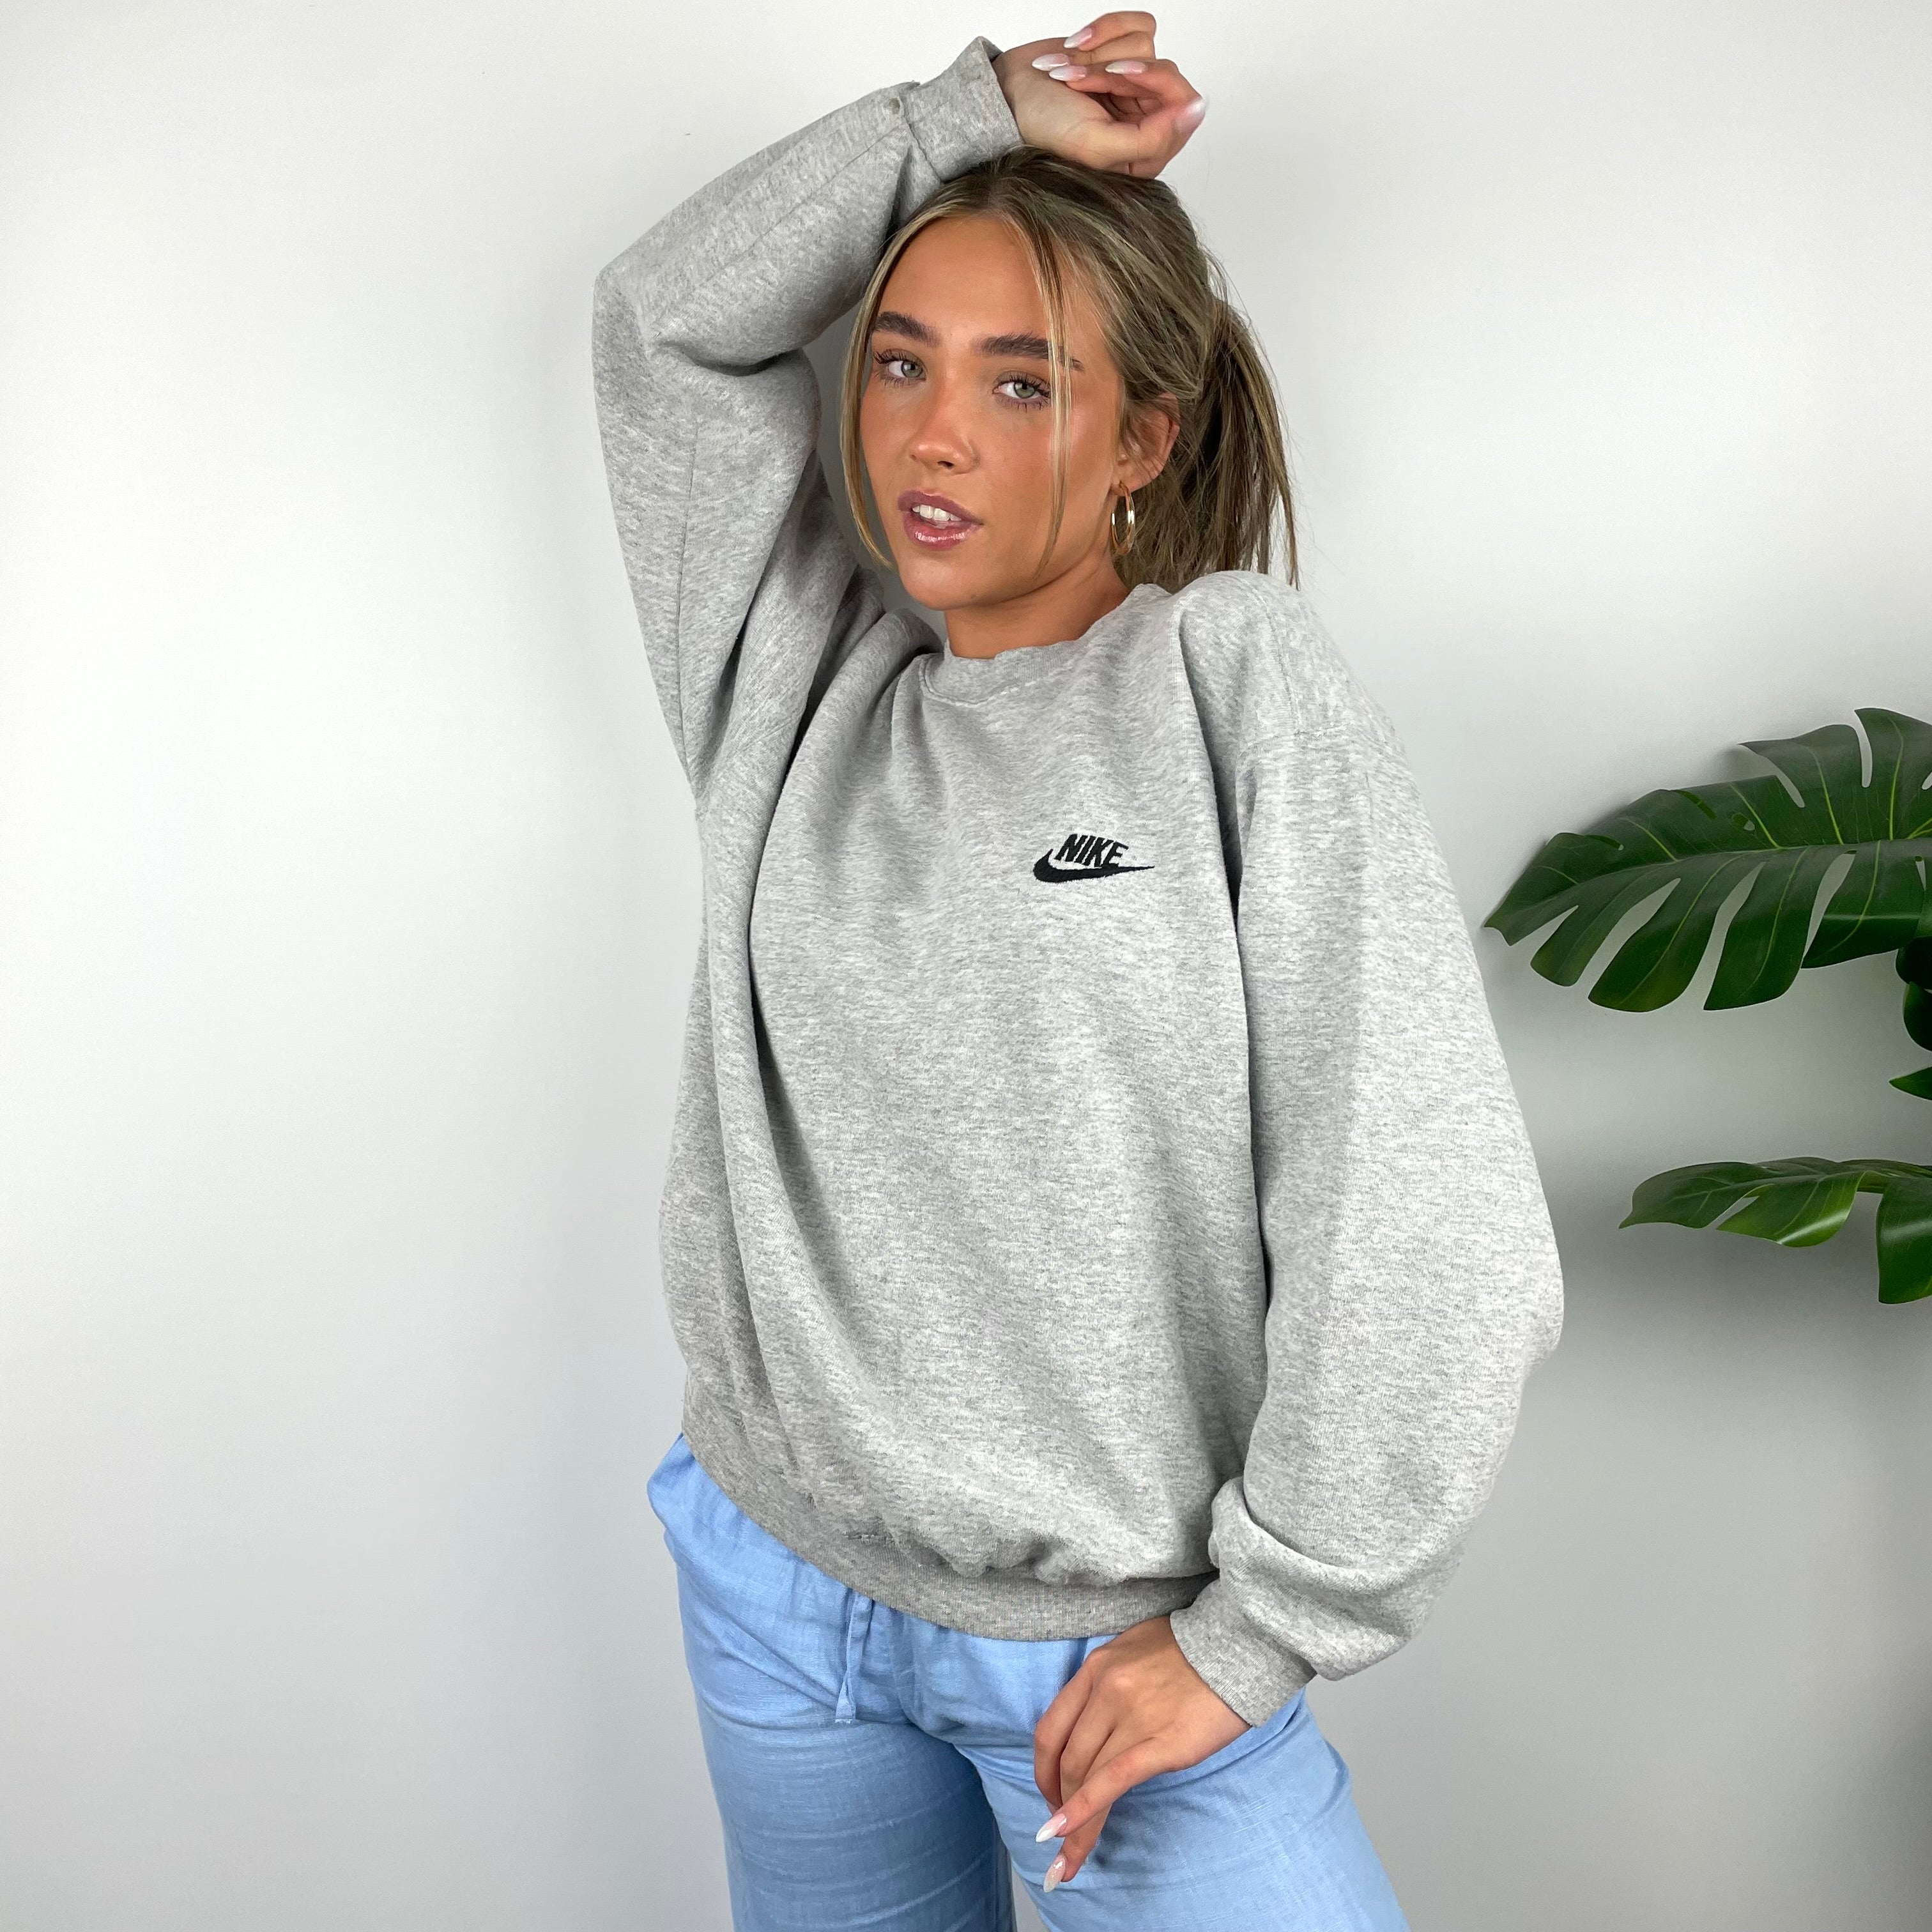 Nike RARE Grey Embroidered Spell Out Sweatshirt (S)